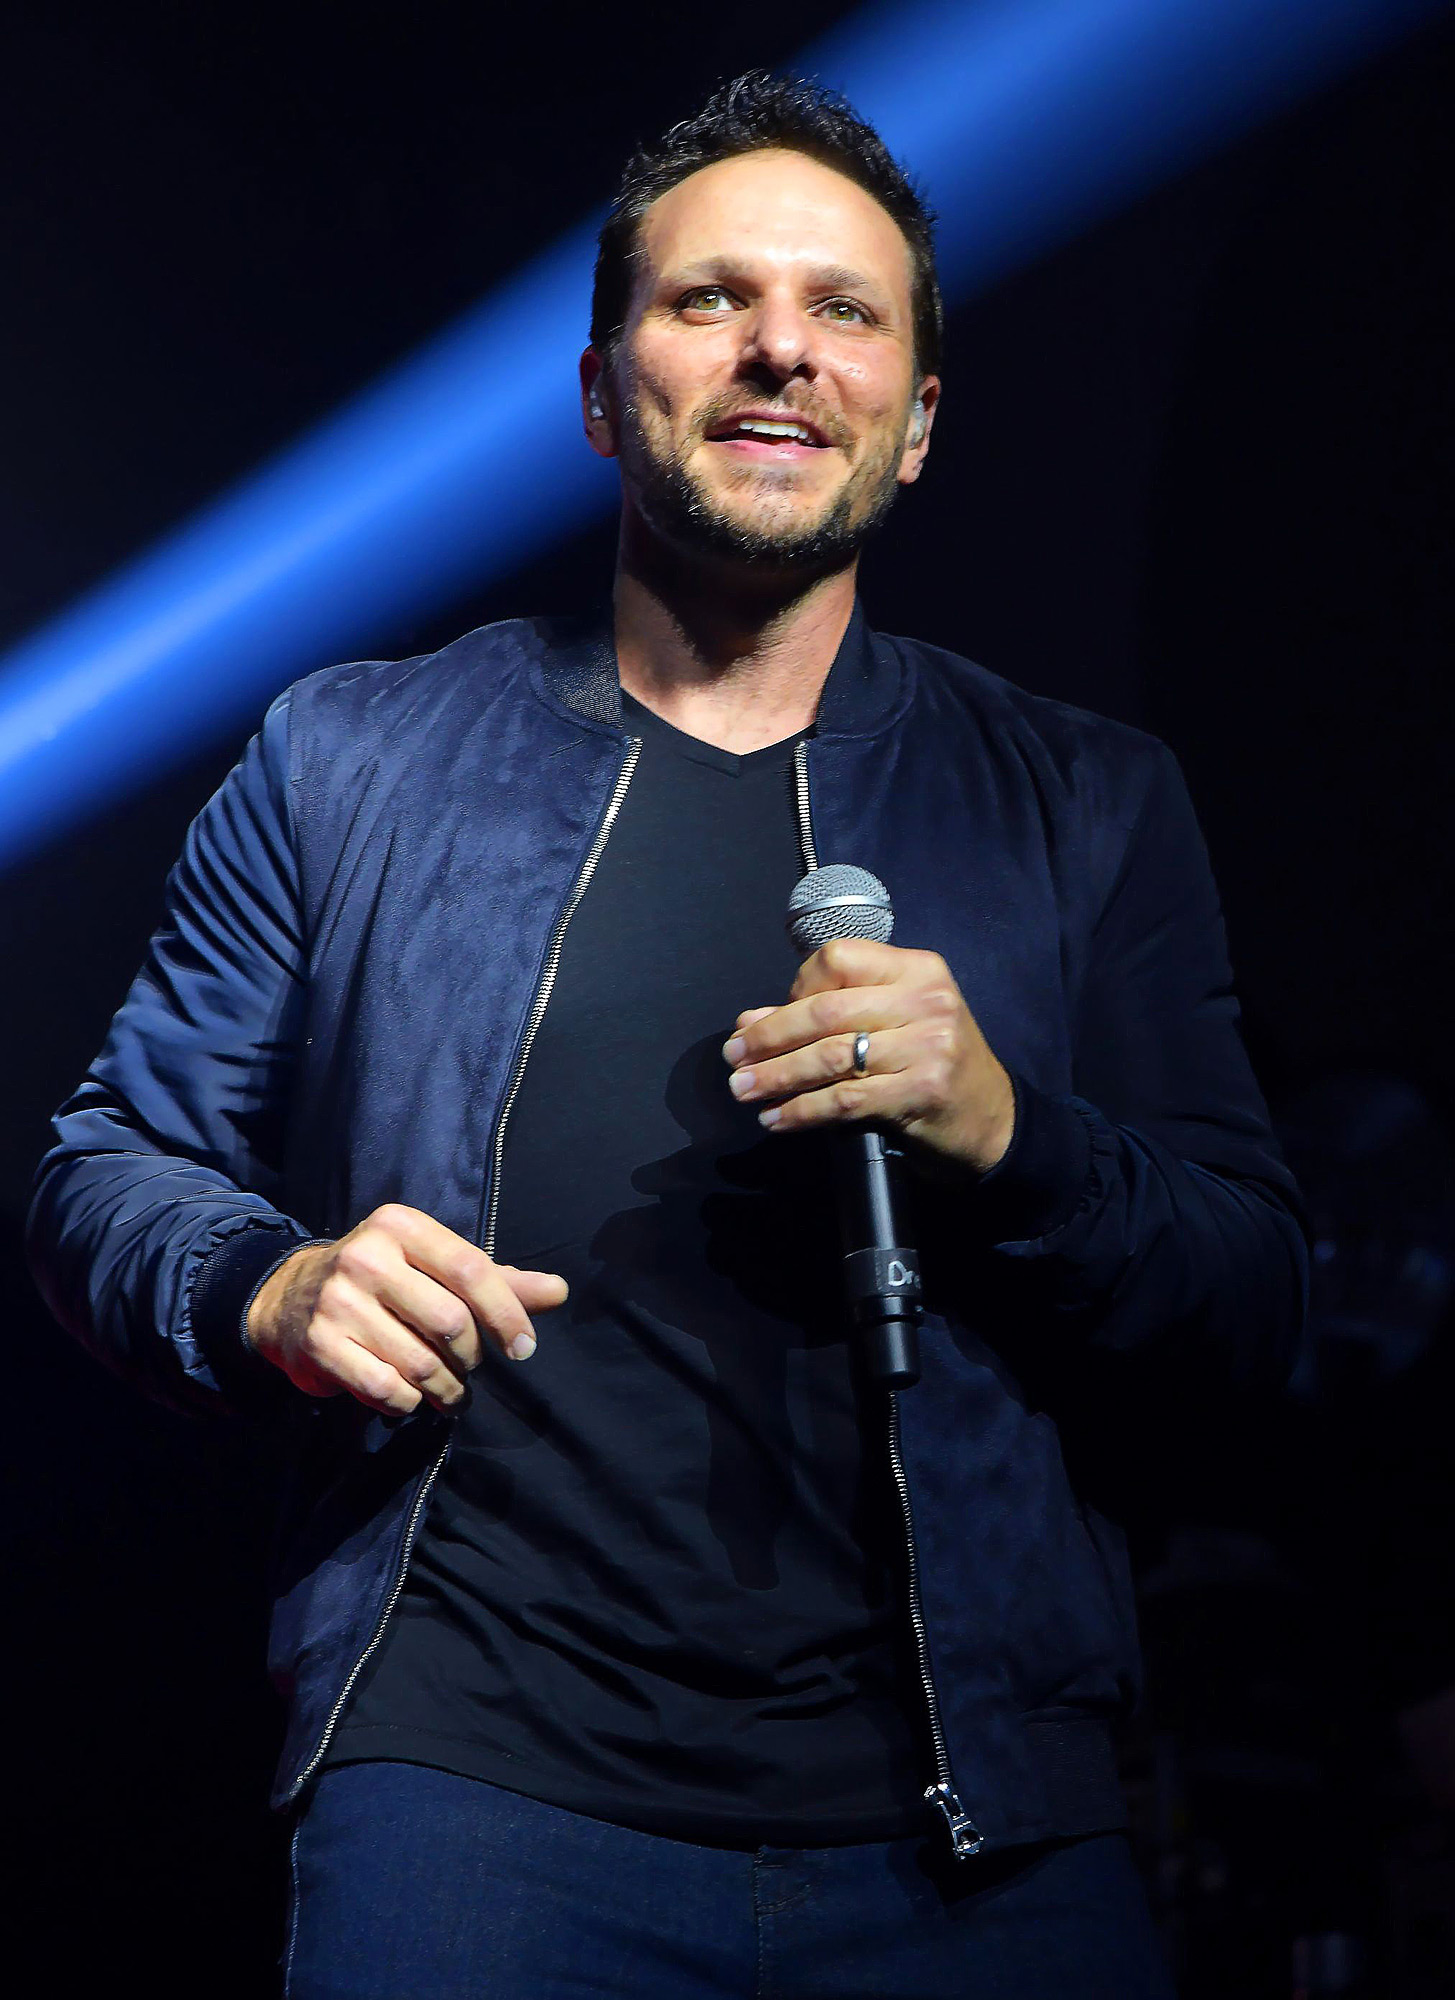 98 Degrees' Drew Lachey on the Band's Comeback, 'Microphone' & More